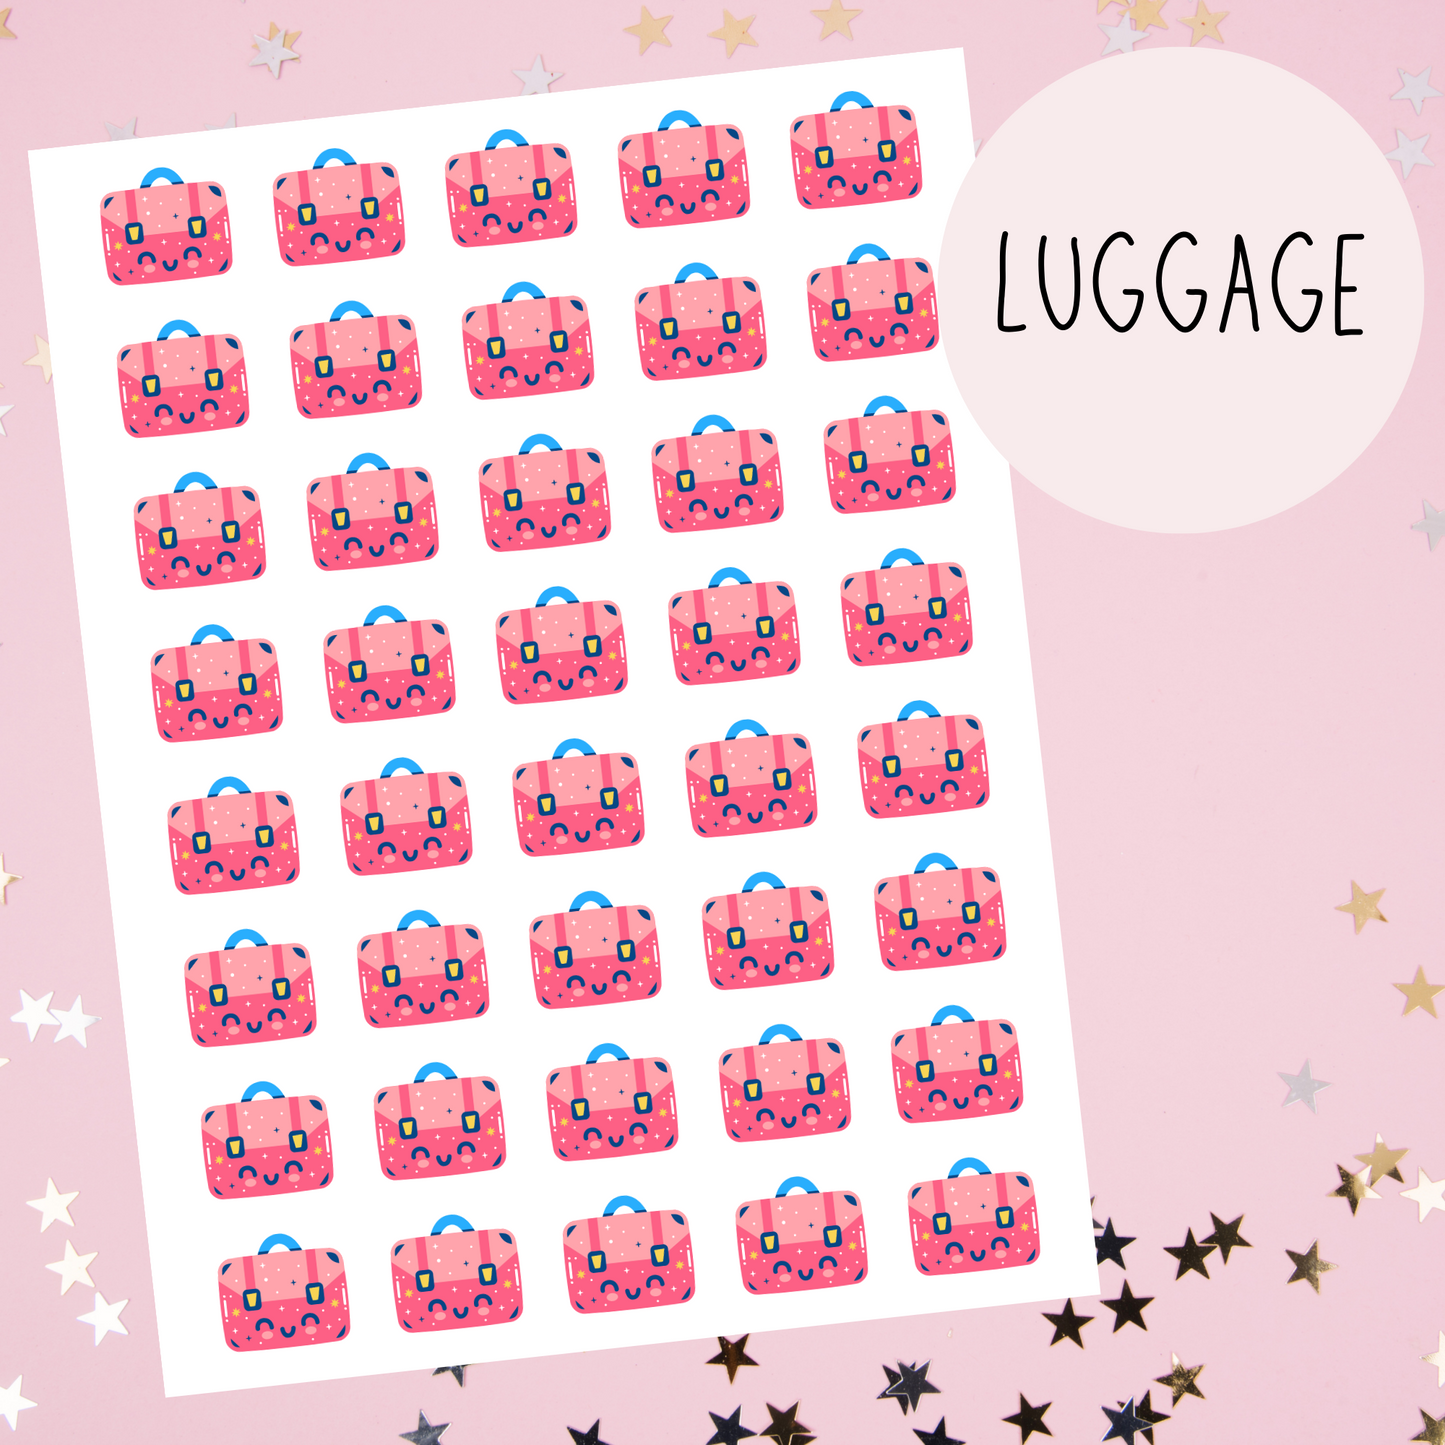 Luggage Planner Stickers